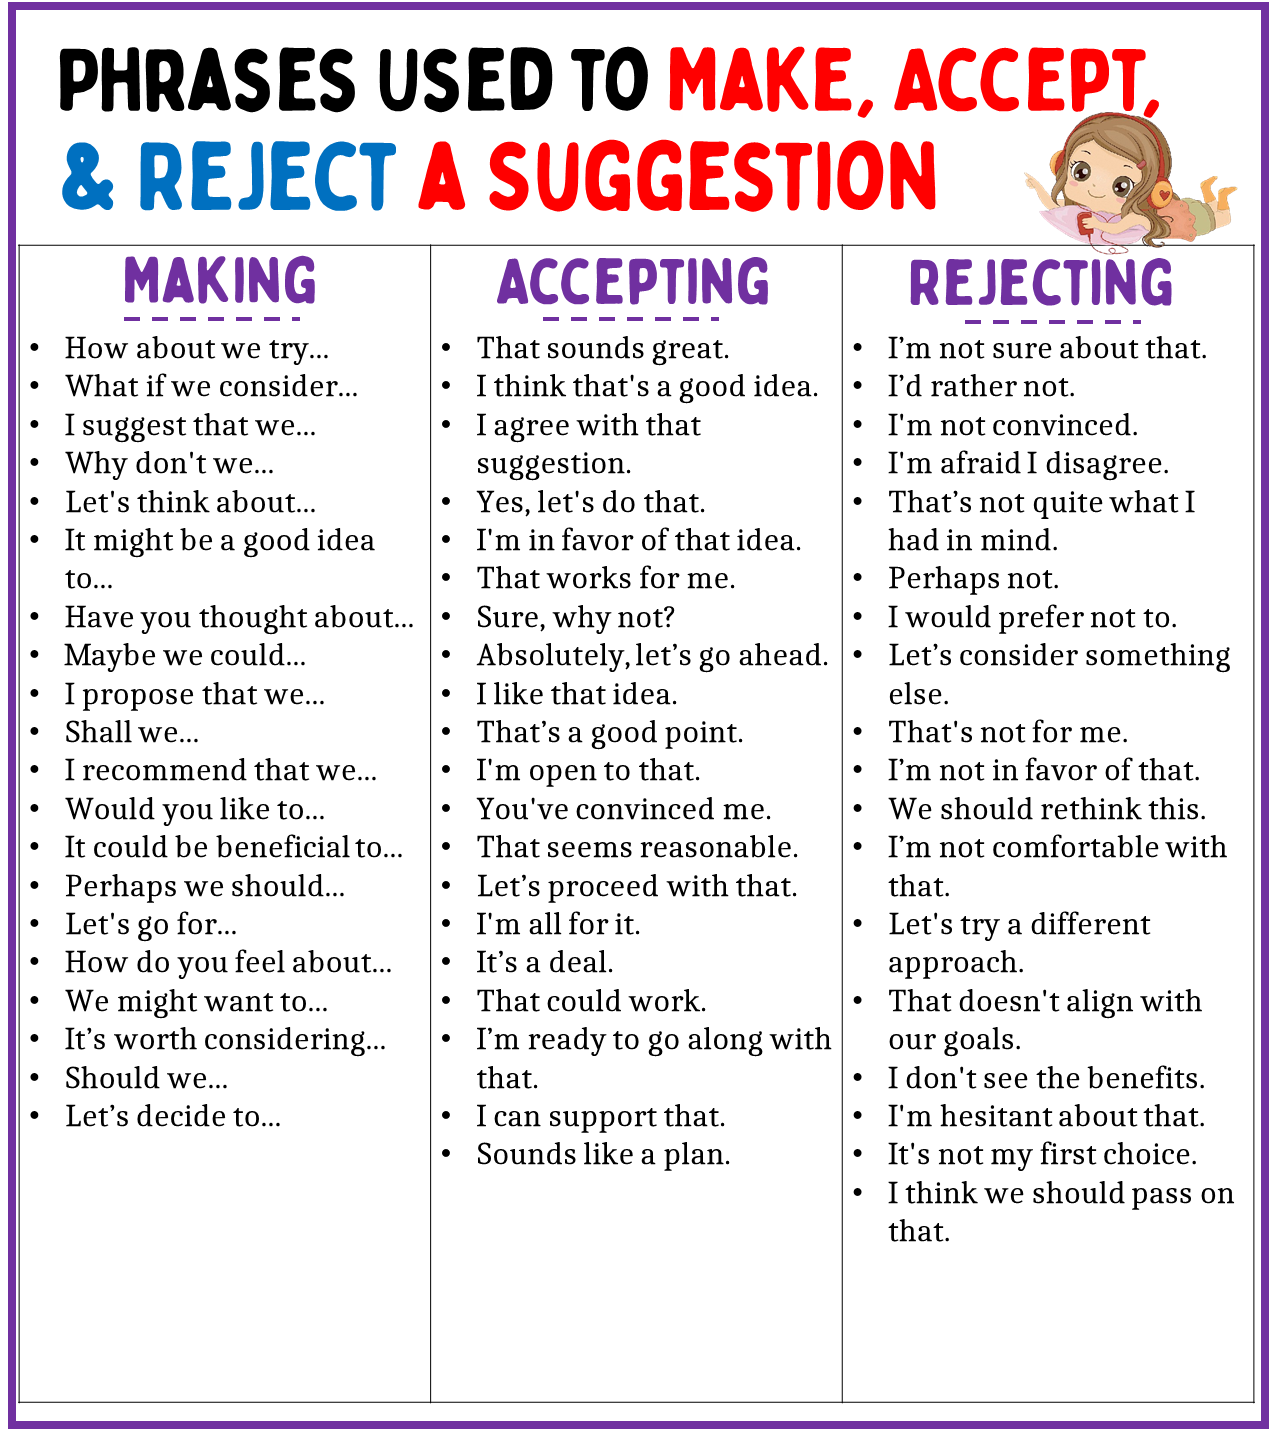 Phrases Used to Make, Accept, and Rejecting Suggestions